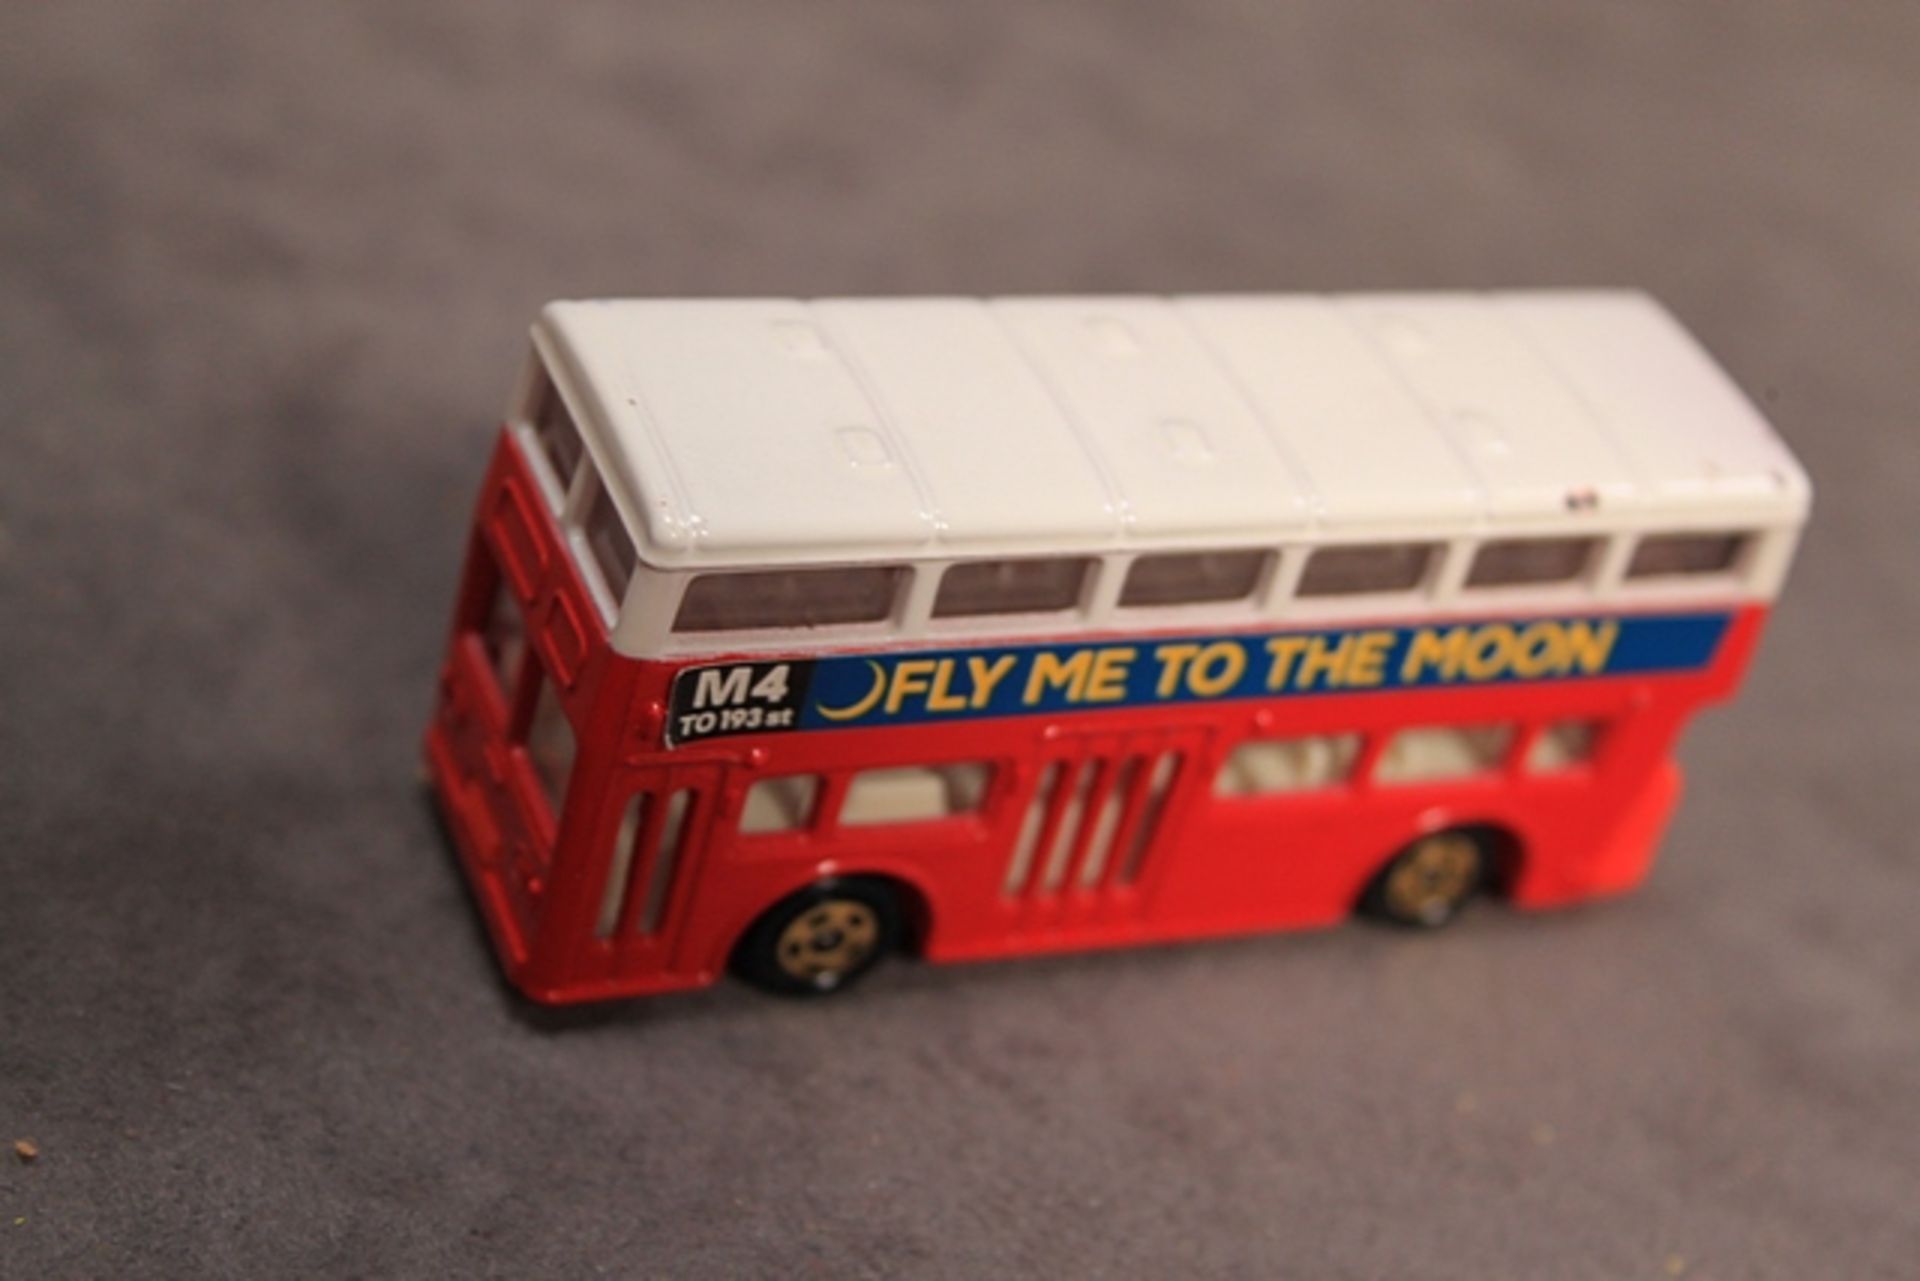 Mint Tomica diecast #F15 London Bus in Red & White with gold wheels (Fly me to the moon)with box